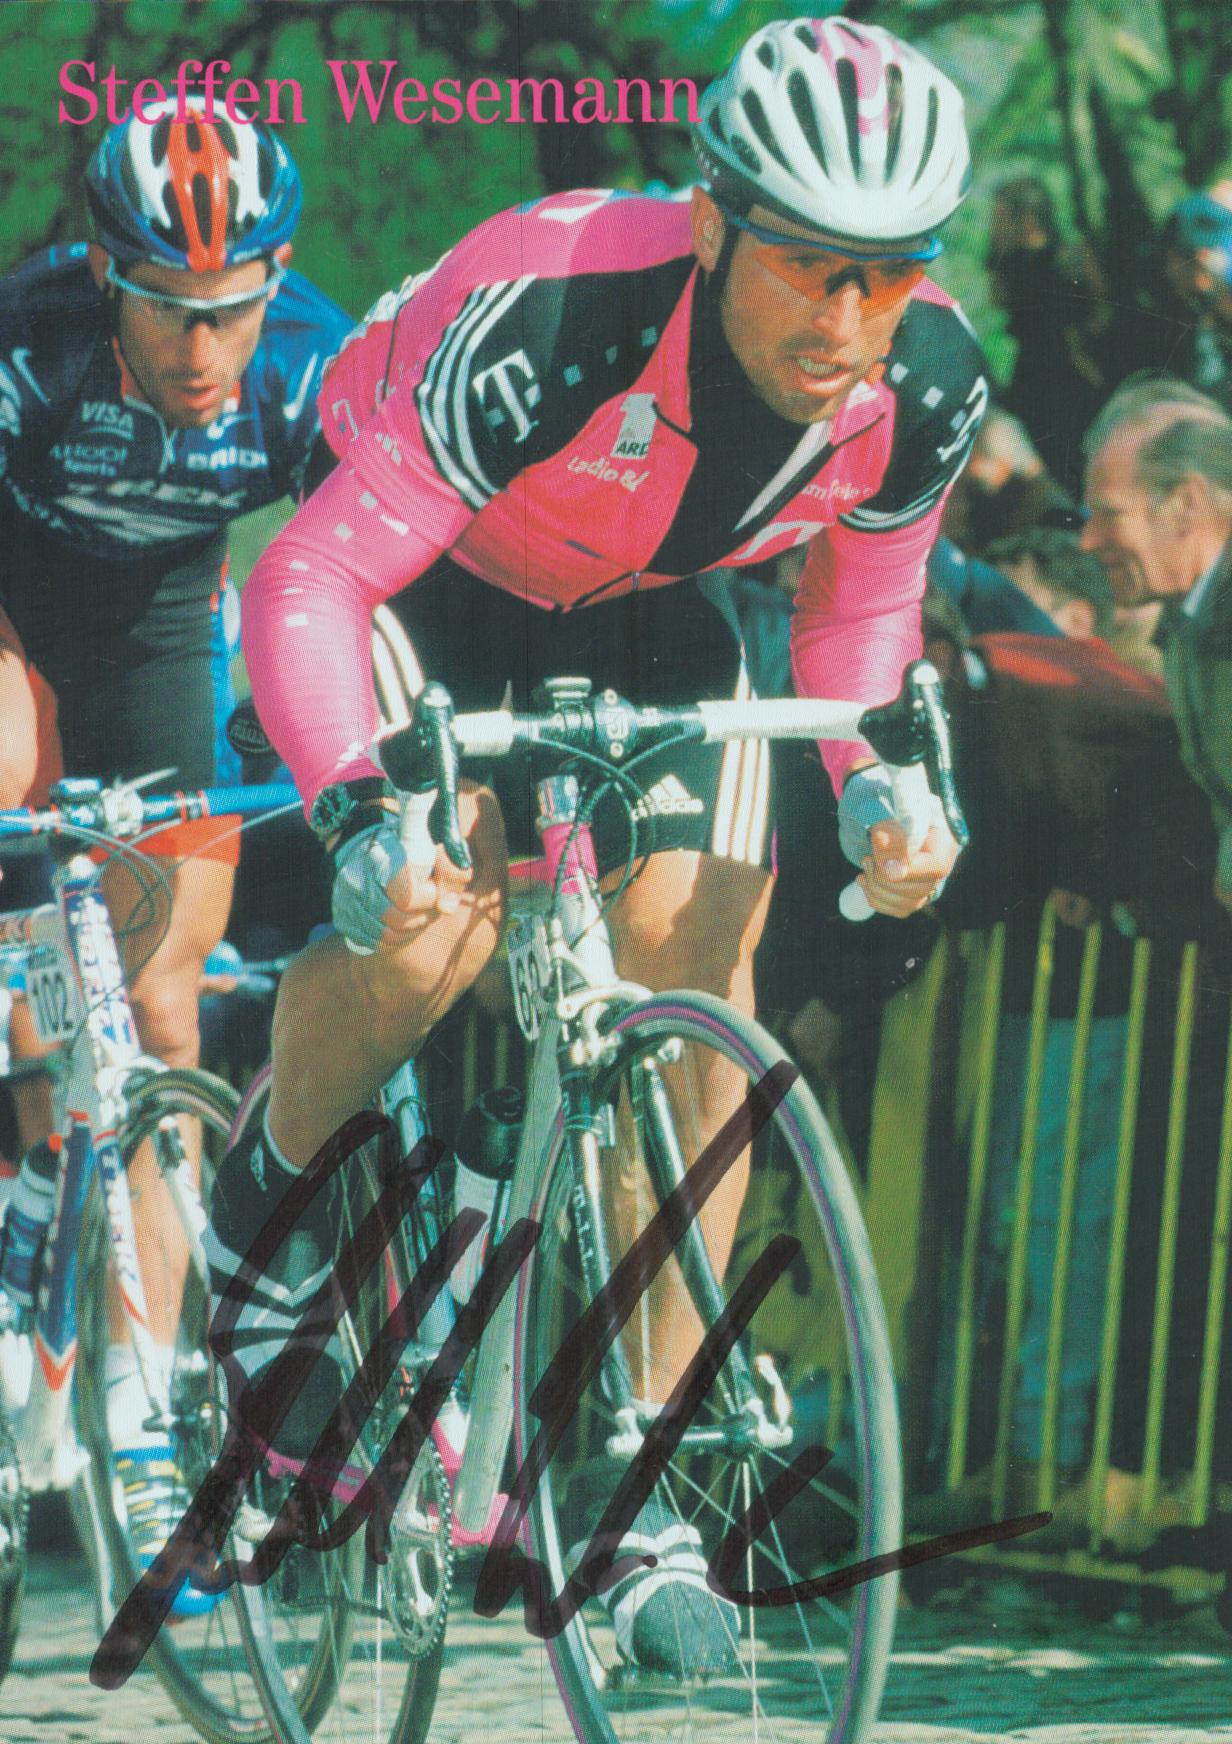 Steffen Wesemann signed 6x4 inch Team Telekom cycling colour promo photo. All autographs come with a